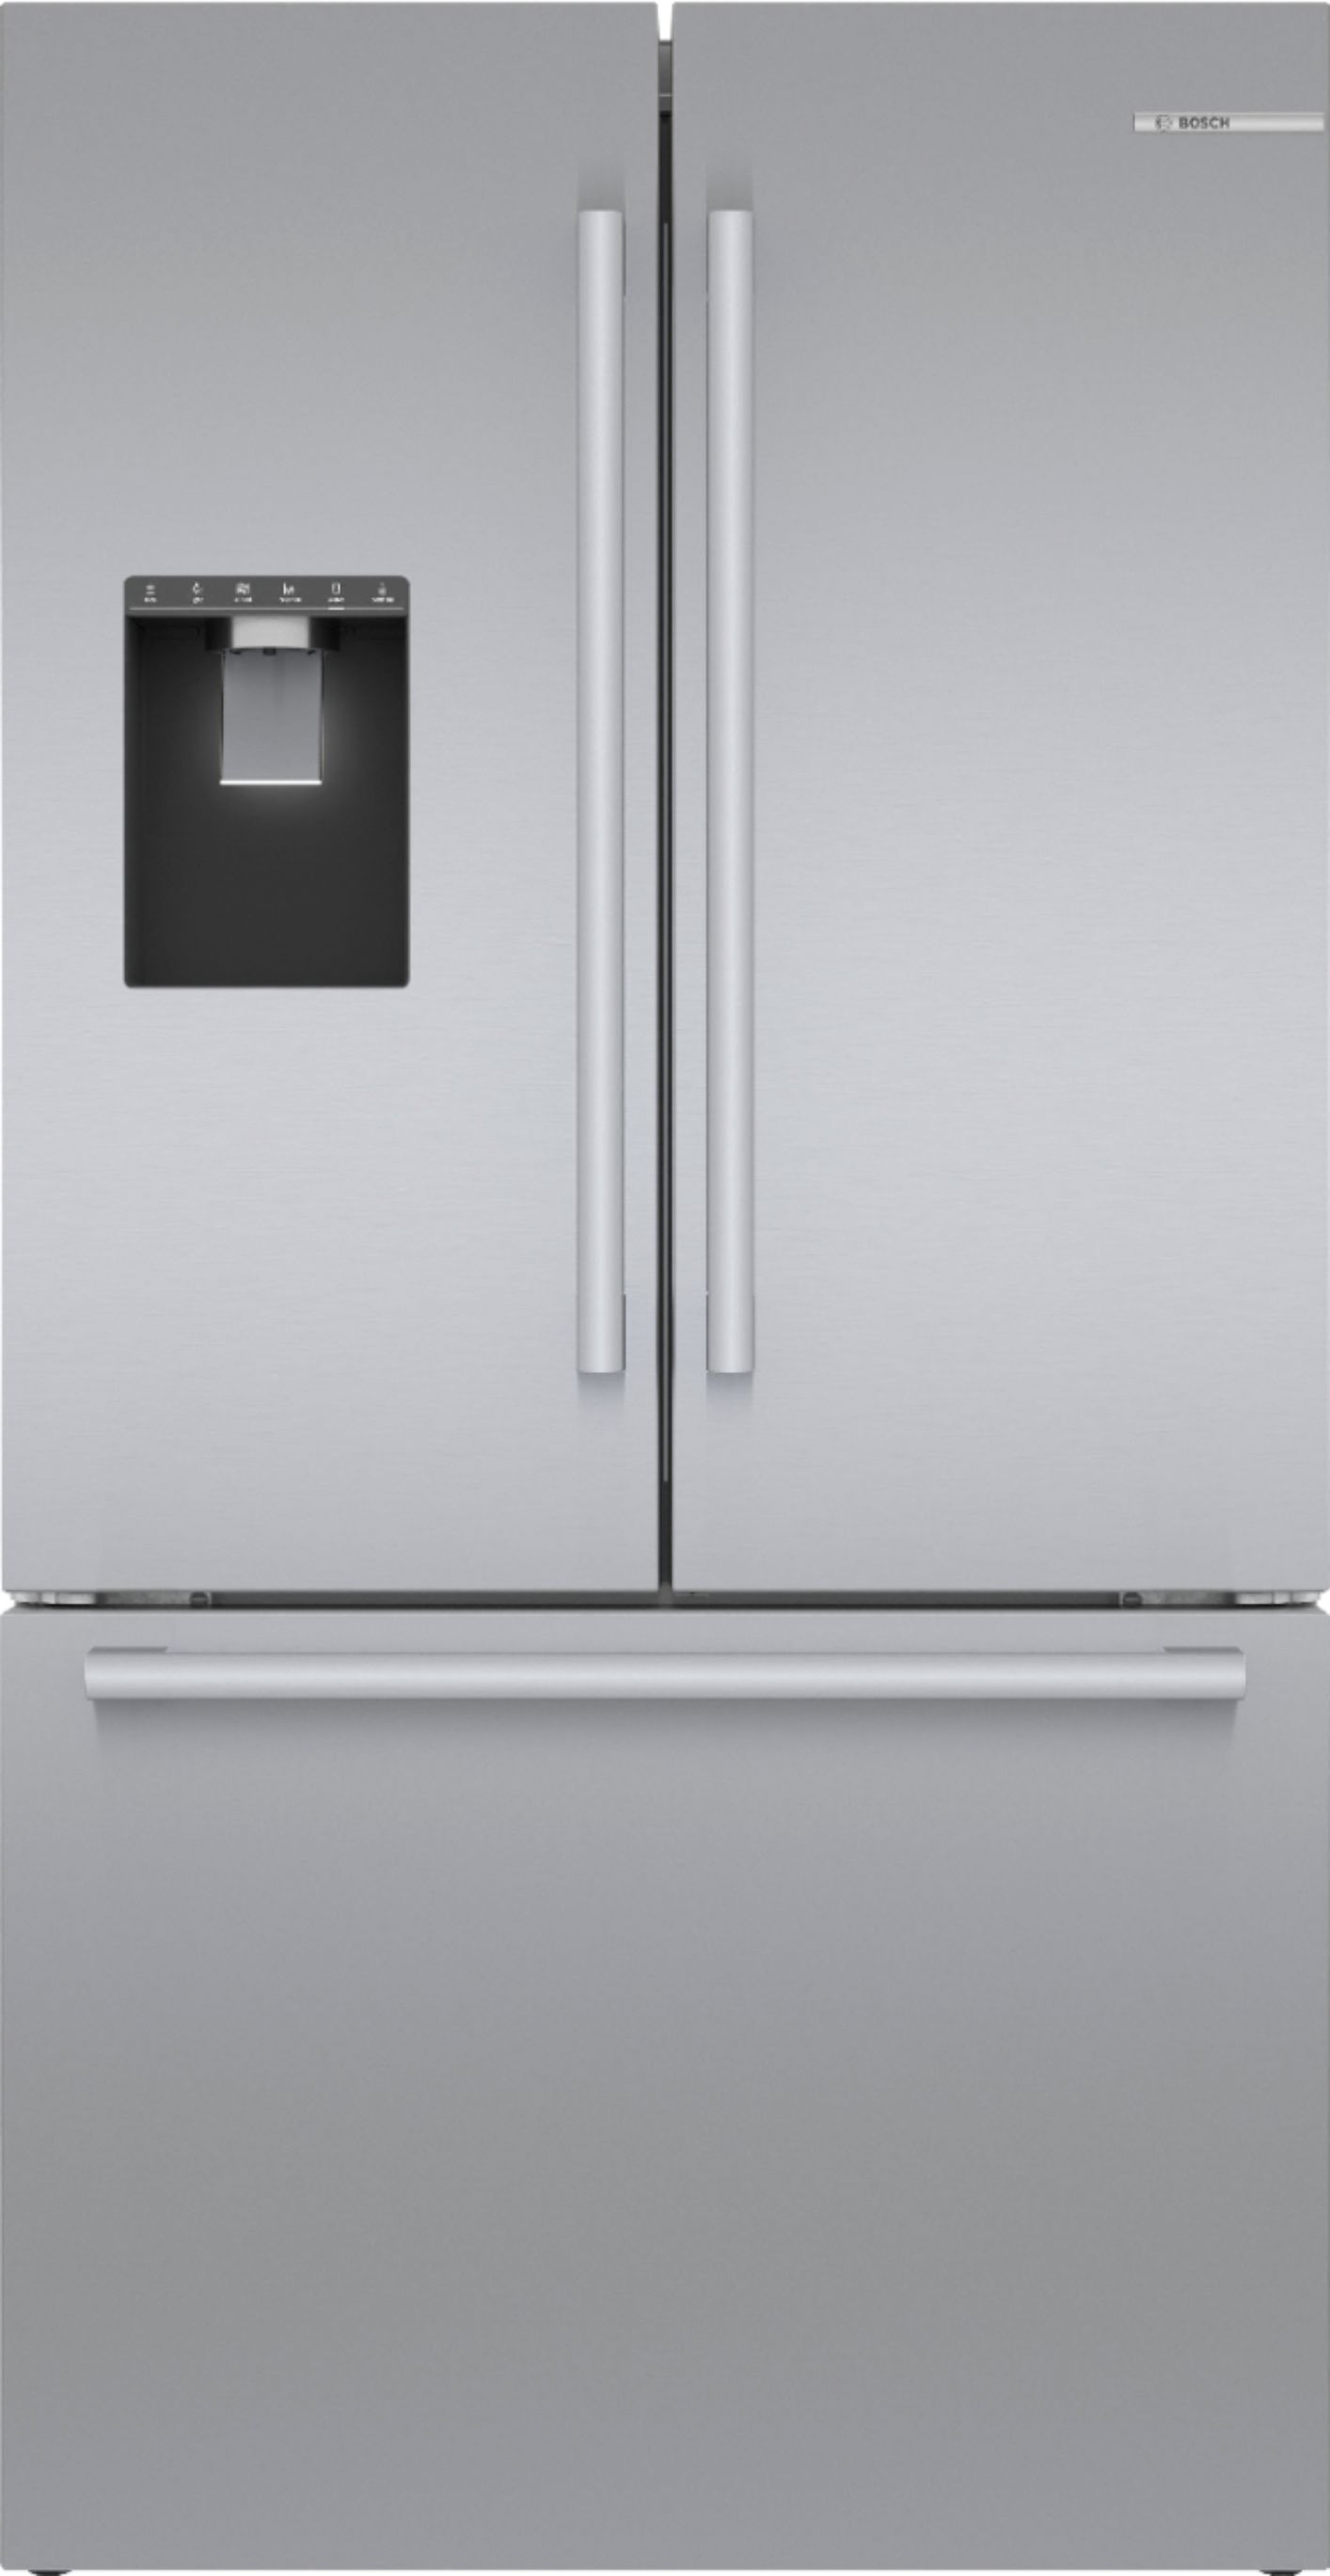 KitchenAid French 3-Door Refrigerator with External Water and Ice Disp